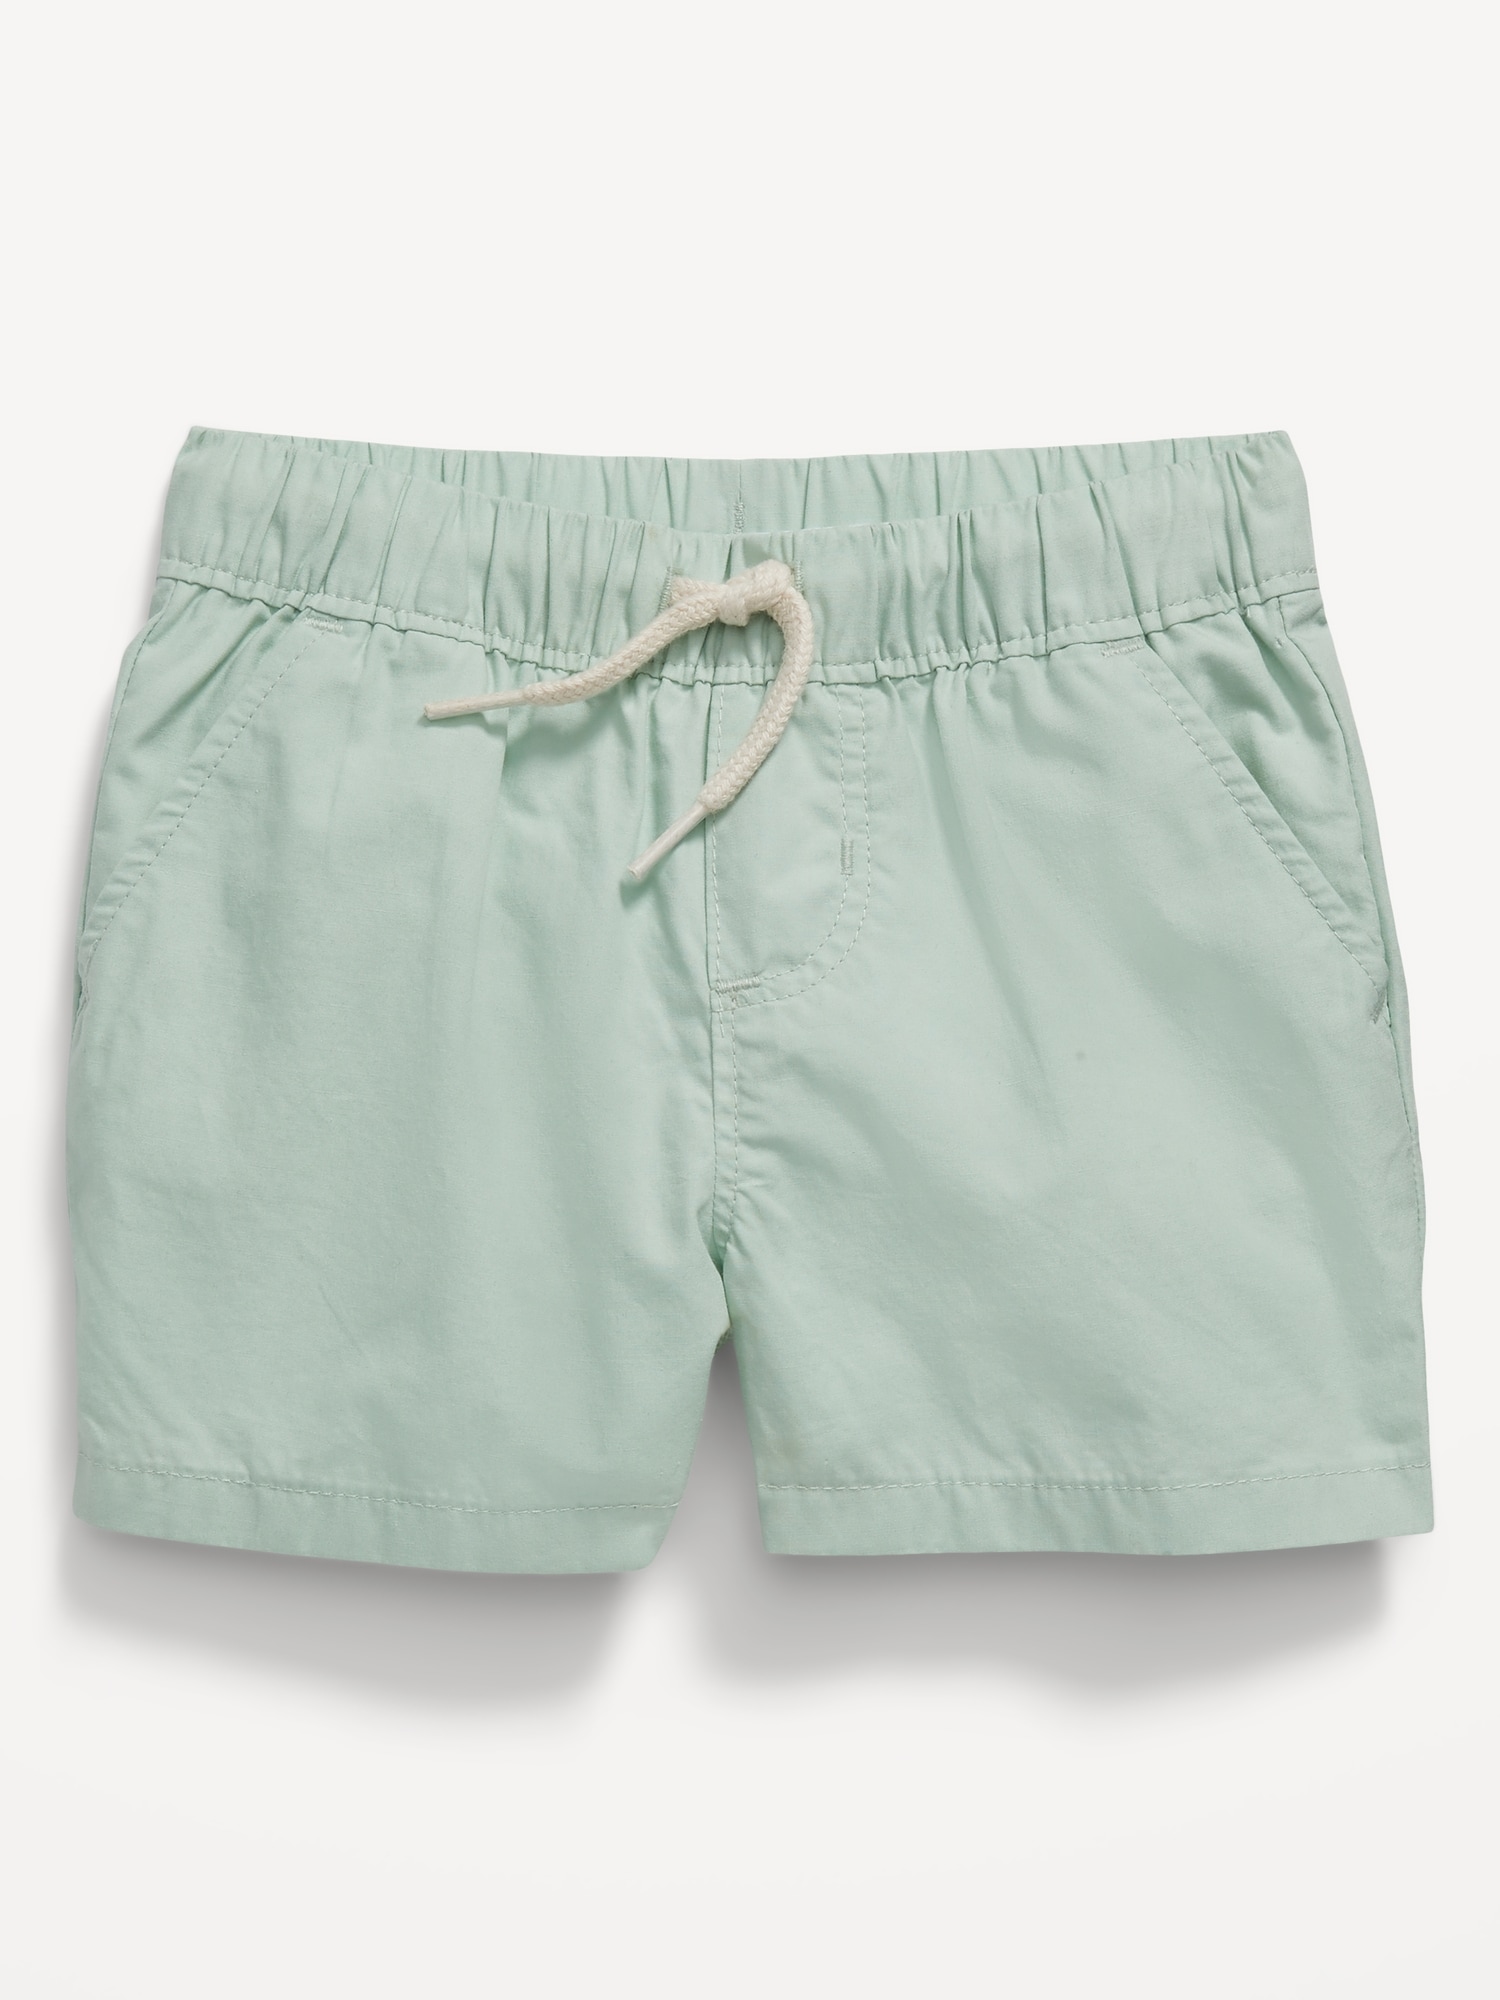 Old Navy Unisex Cotton Poplin Pull-On Shorts for Baby green. 1